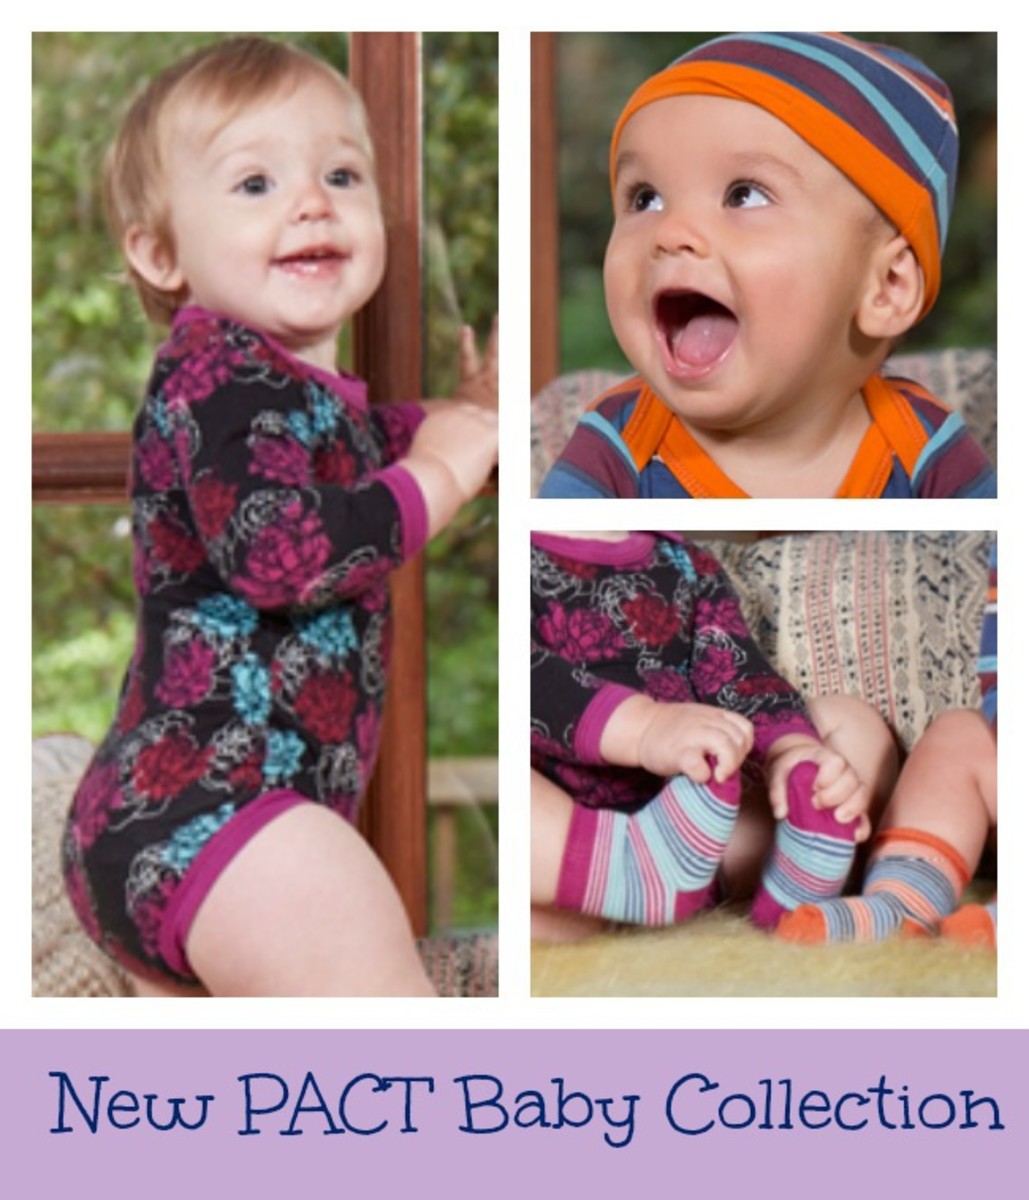 PACT Baby, PACT Baby collection, baby review